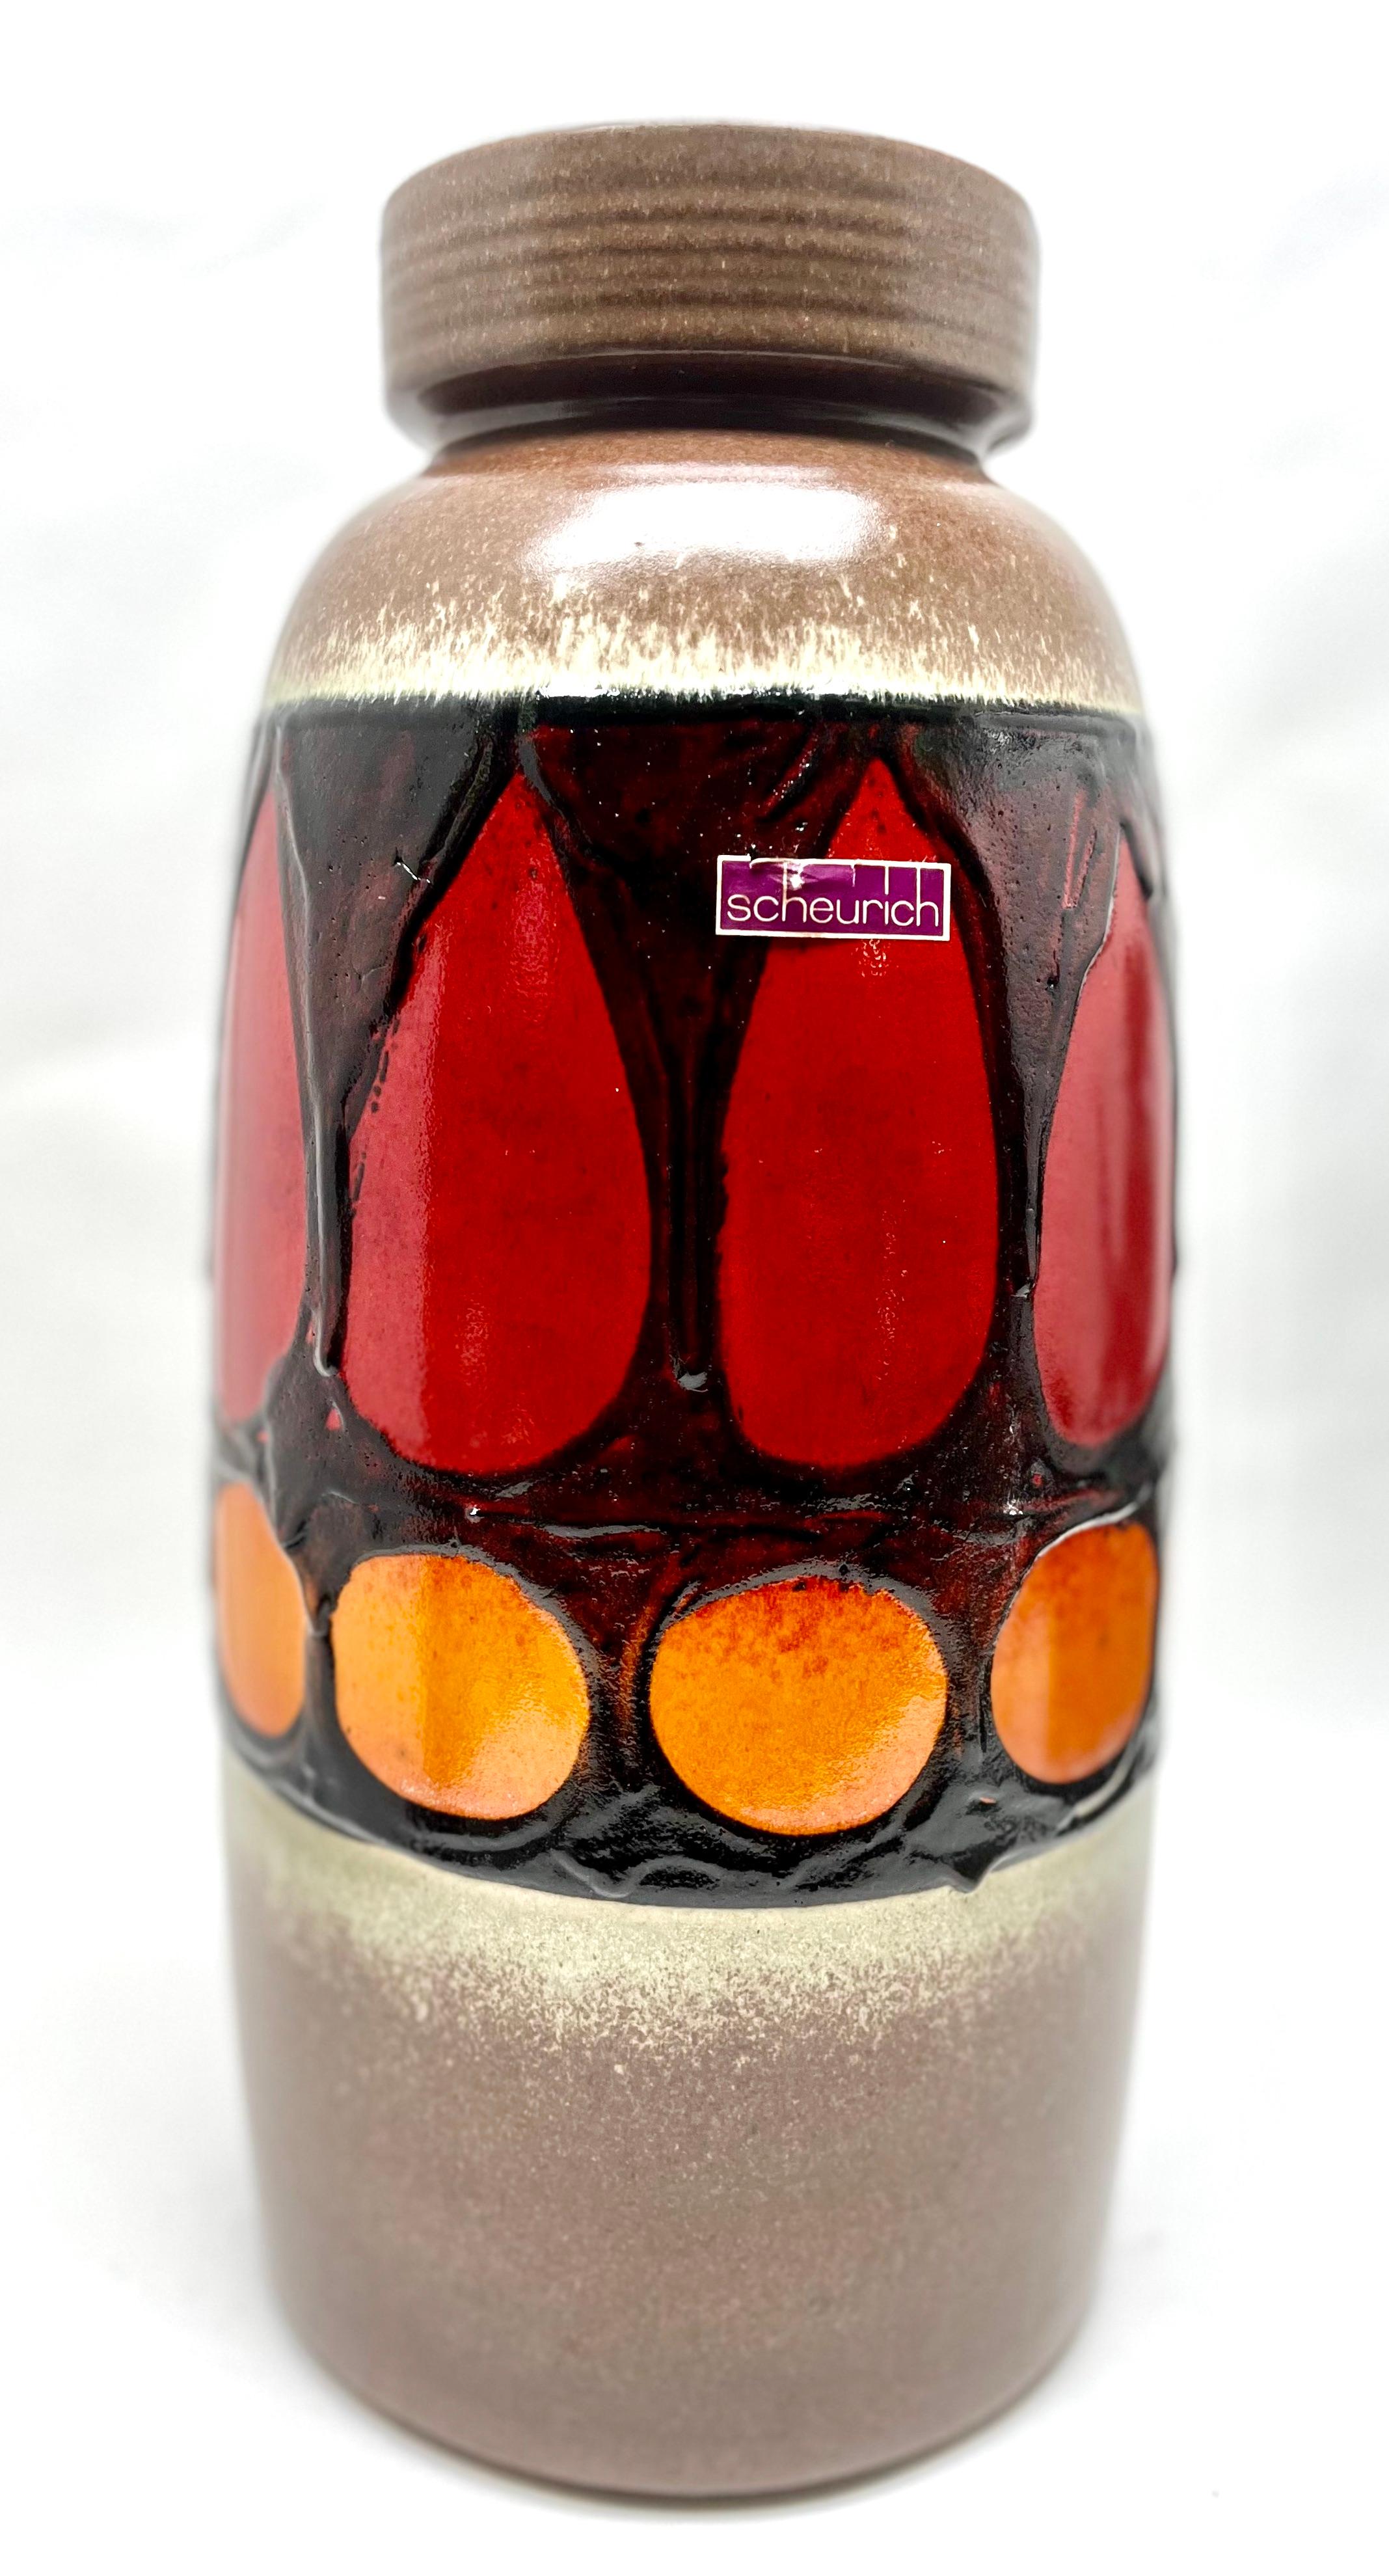 Vintage Scheurich vase in drip glaze featuring the indented surfaces.
On close inspection the glaze includes which give greater depth to the surfaces.



































 